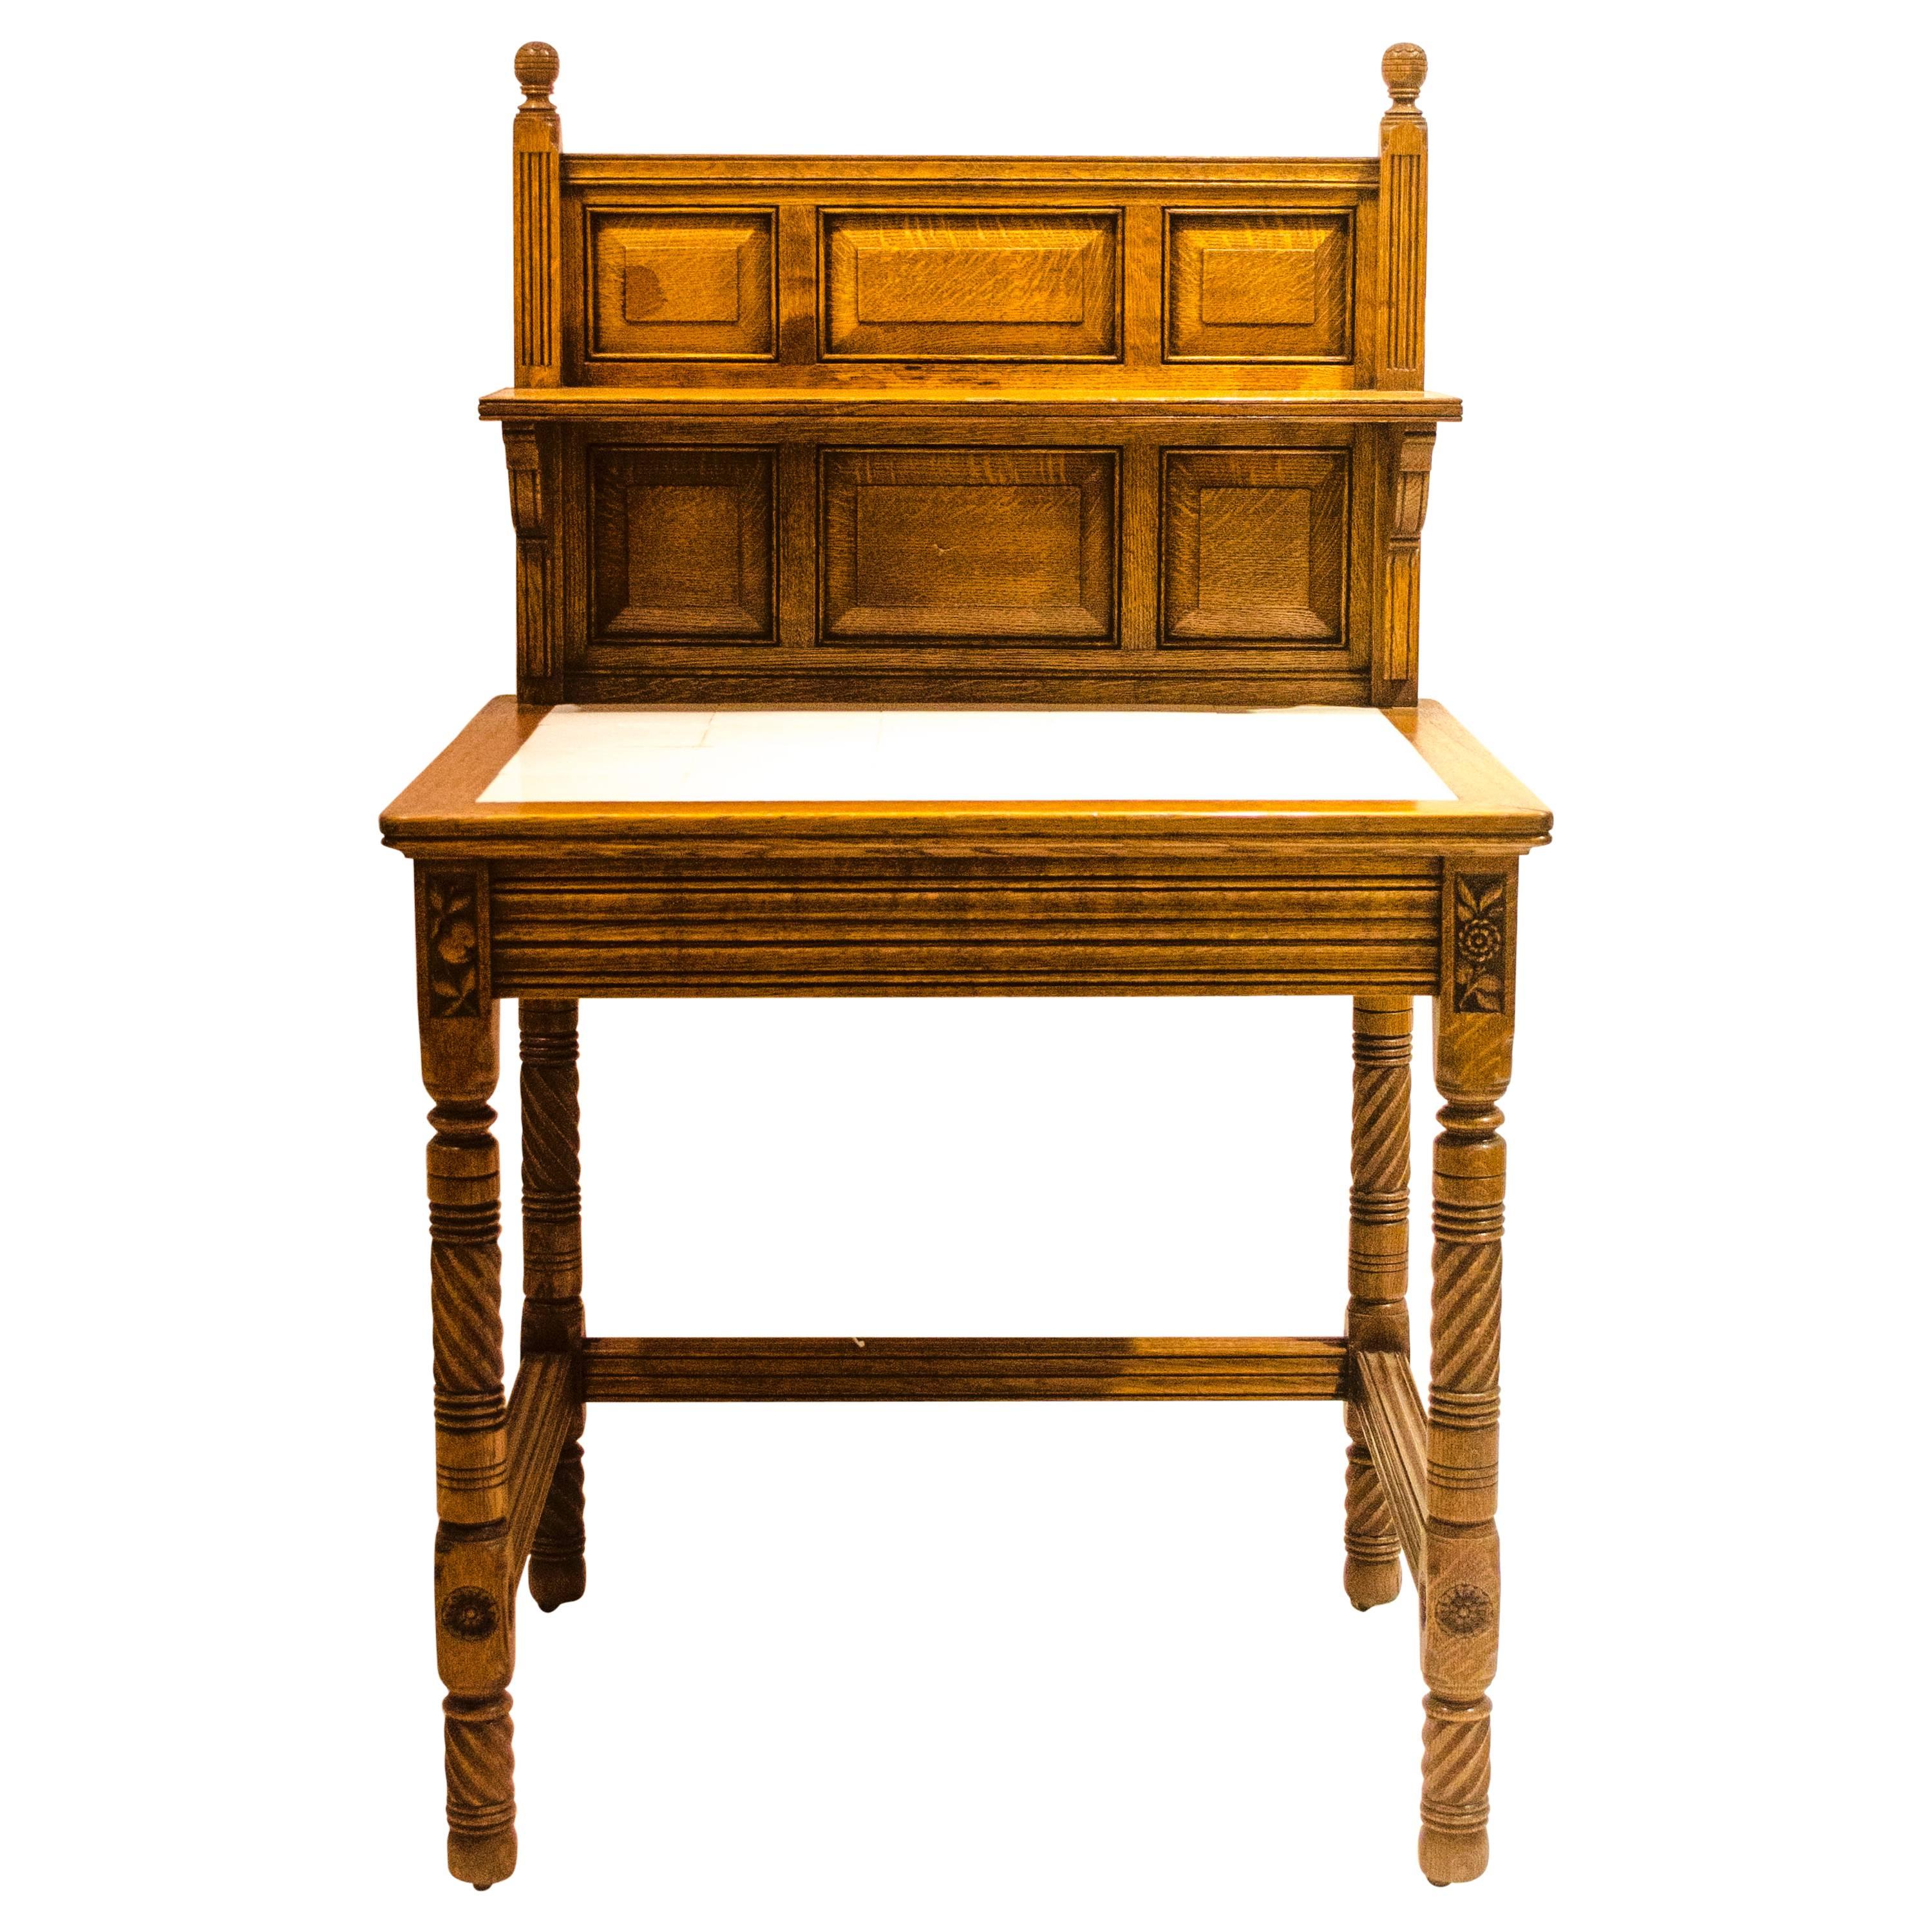 Bruce Talbert. An Arts & Crafts Oak Washstand probably made by Gillows 